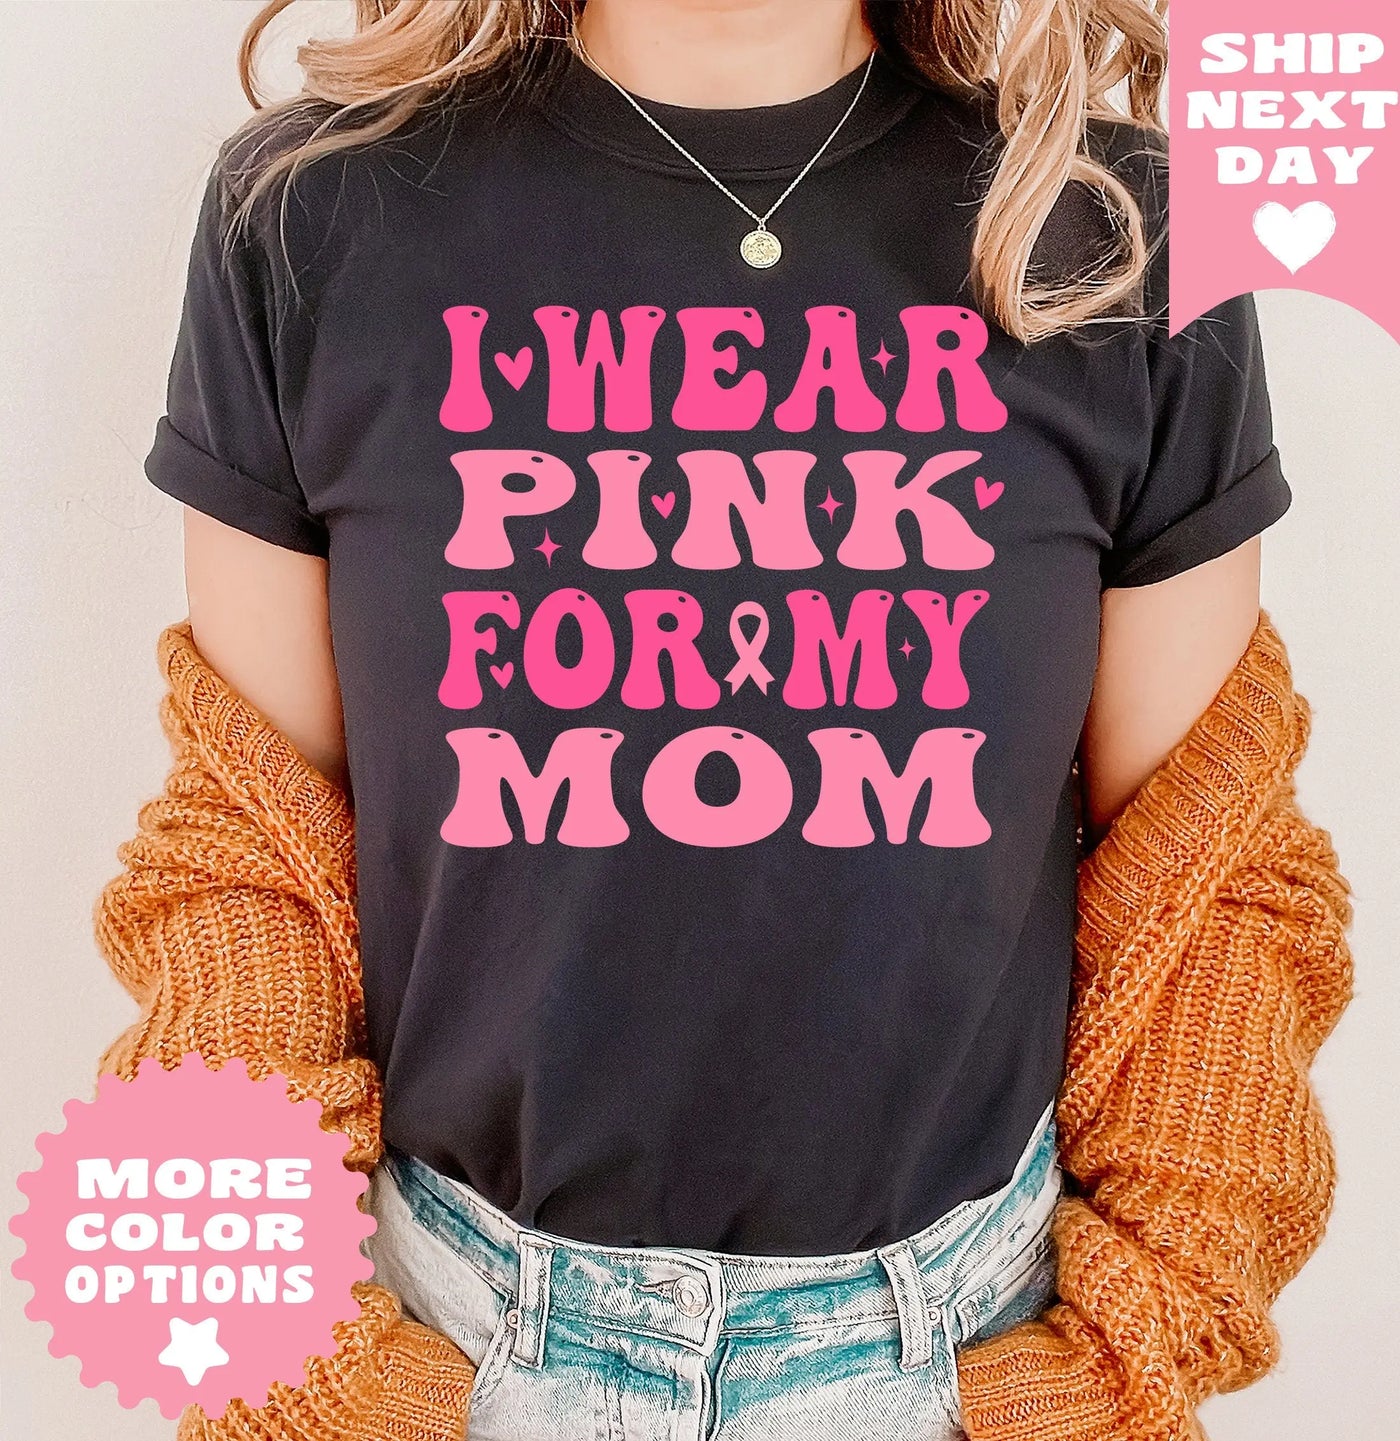 I Wear Pink For My Mom Shirt, Pink Ribbon Shirt, Breast Cancer Shirt, Cancer TShirt, Cancer Mom TShirt, Cancer Awareness, Cancer Support Tee Raveloo